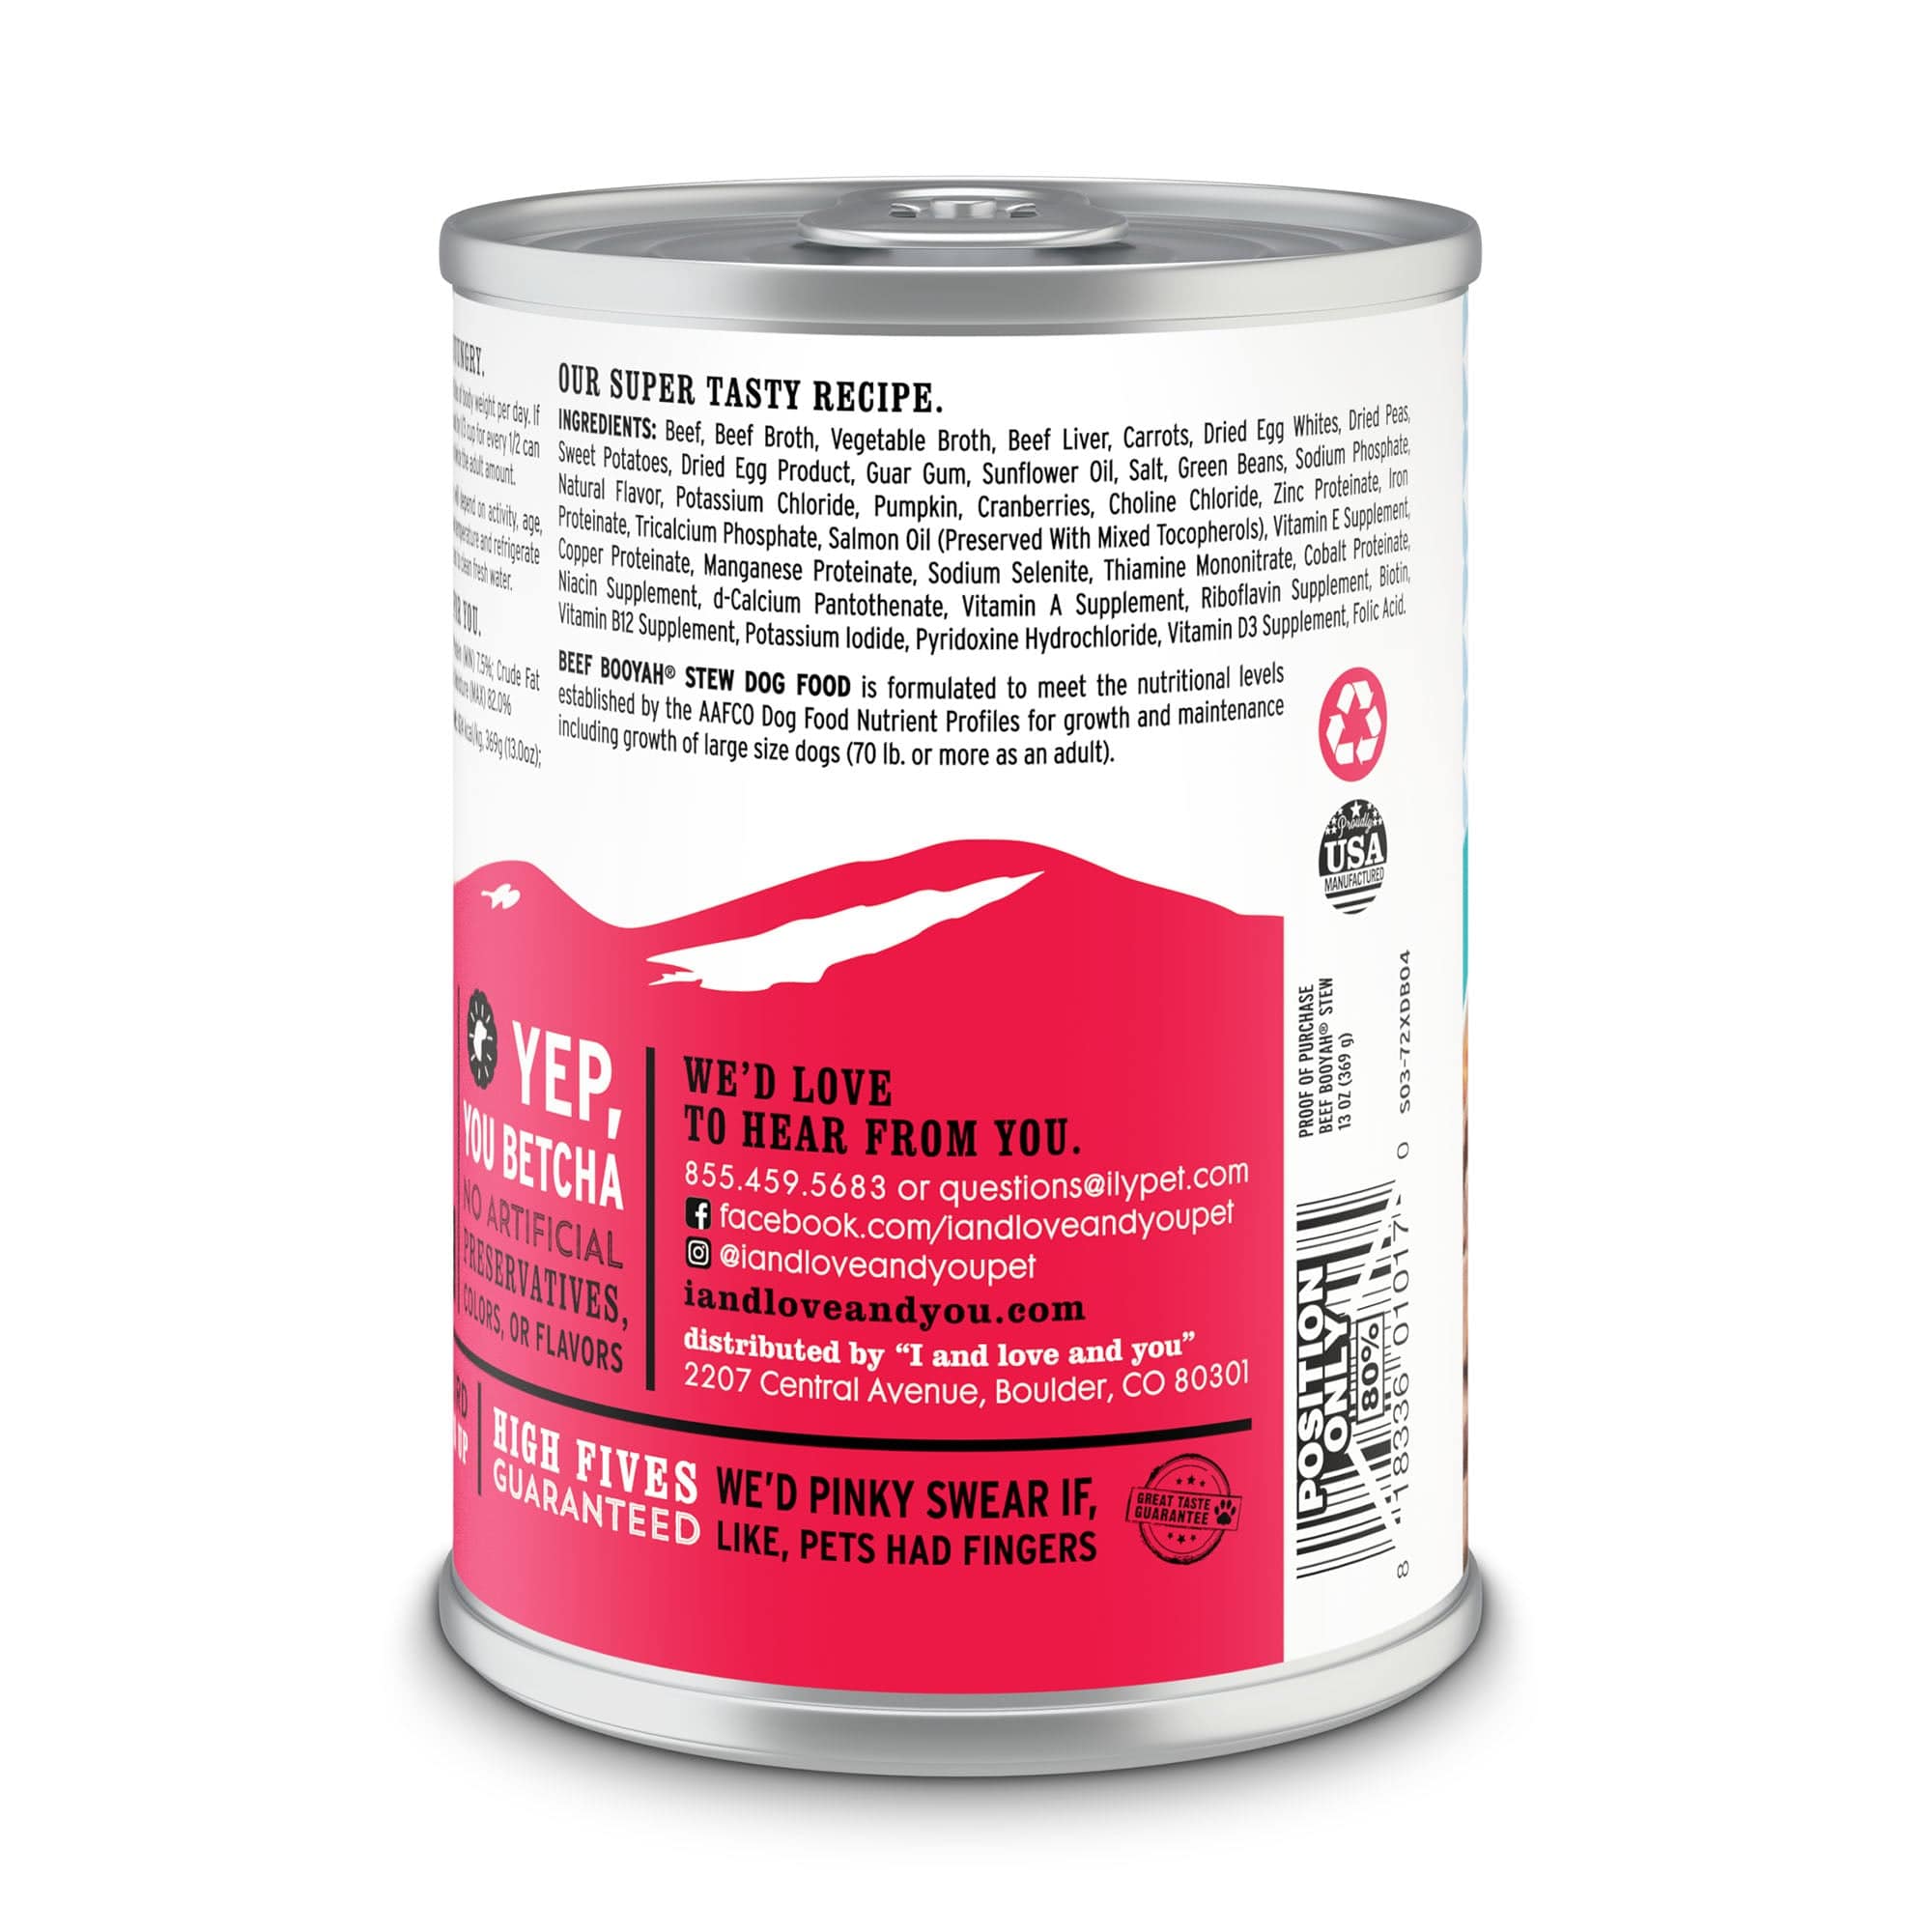 Beef Booyah Stew canned wet food for dogs, featuring a label and text, ready to serve up a savory, protein-packed meal.